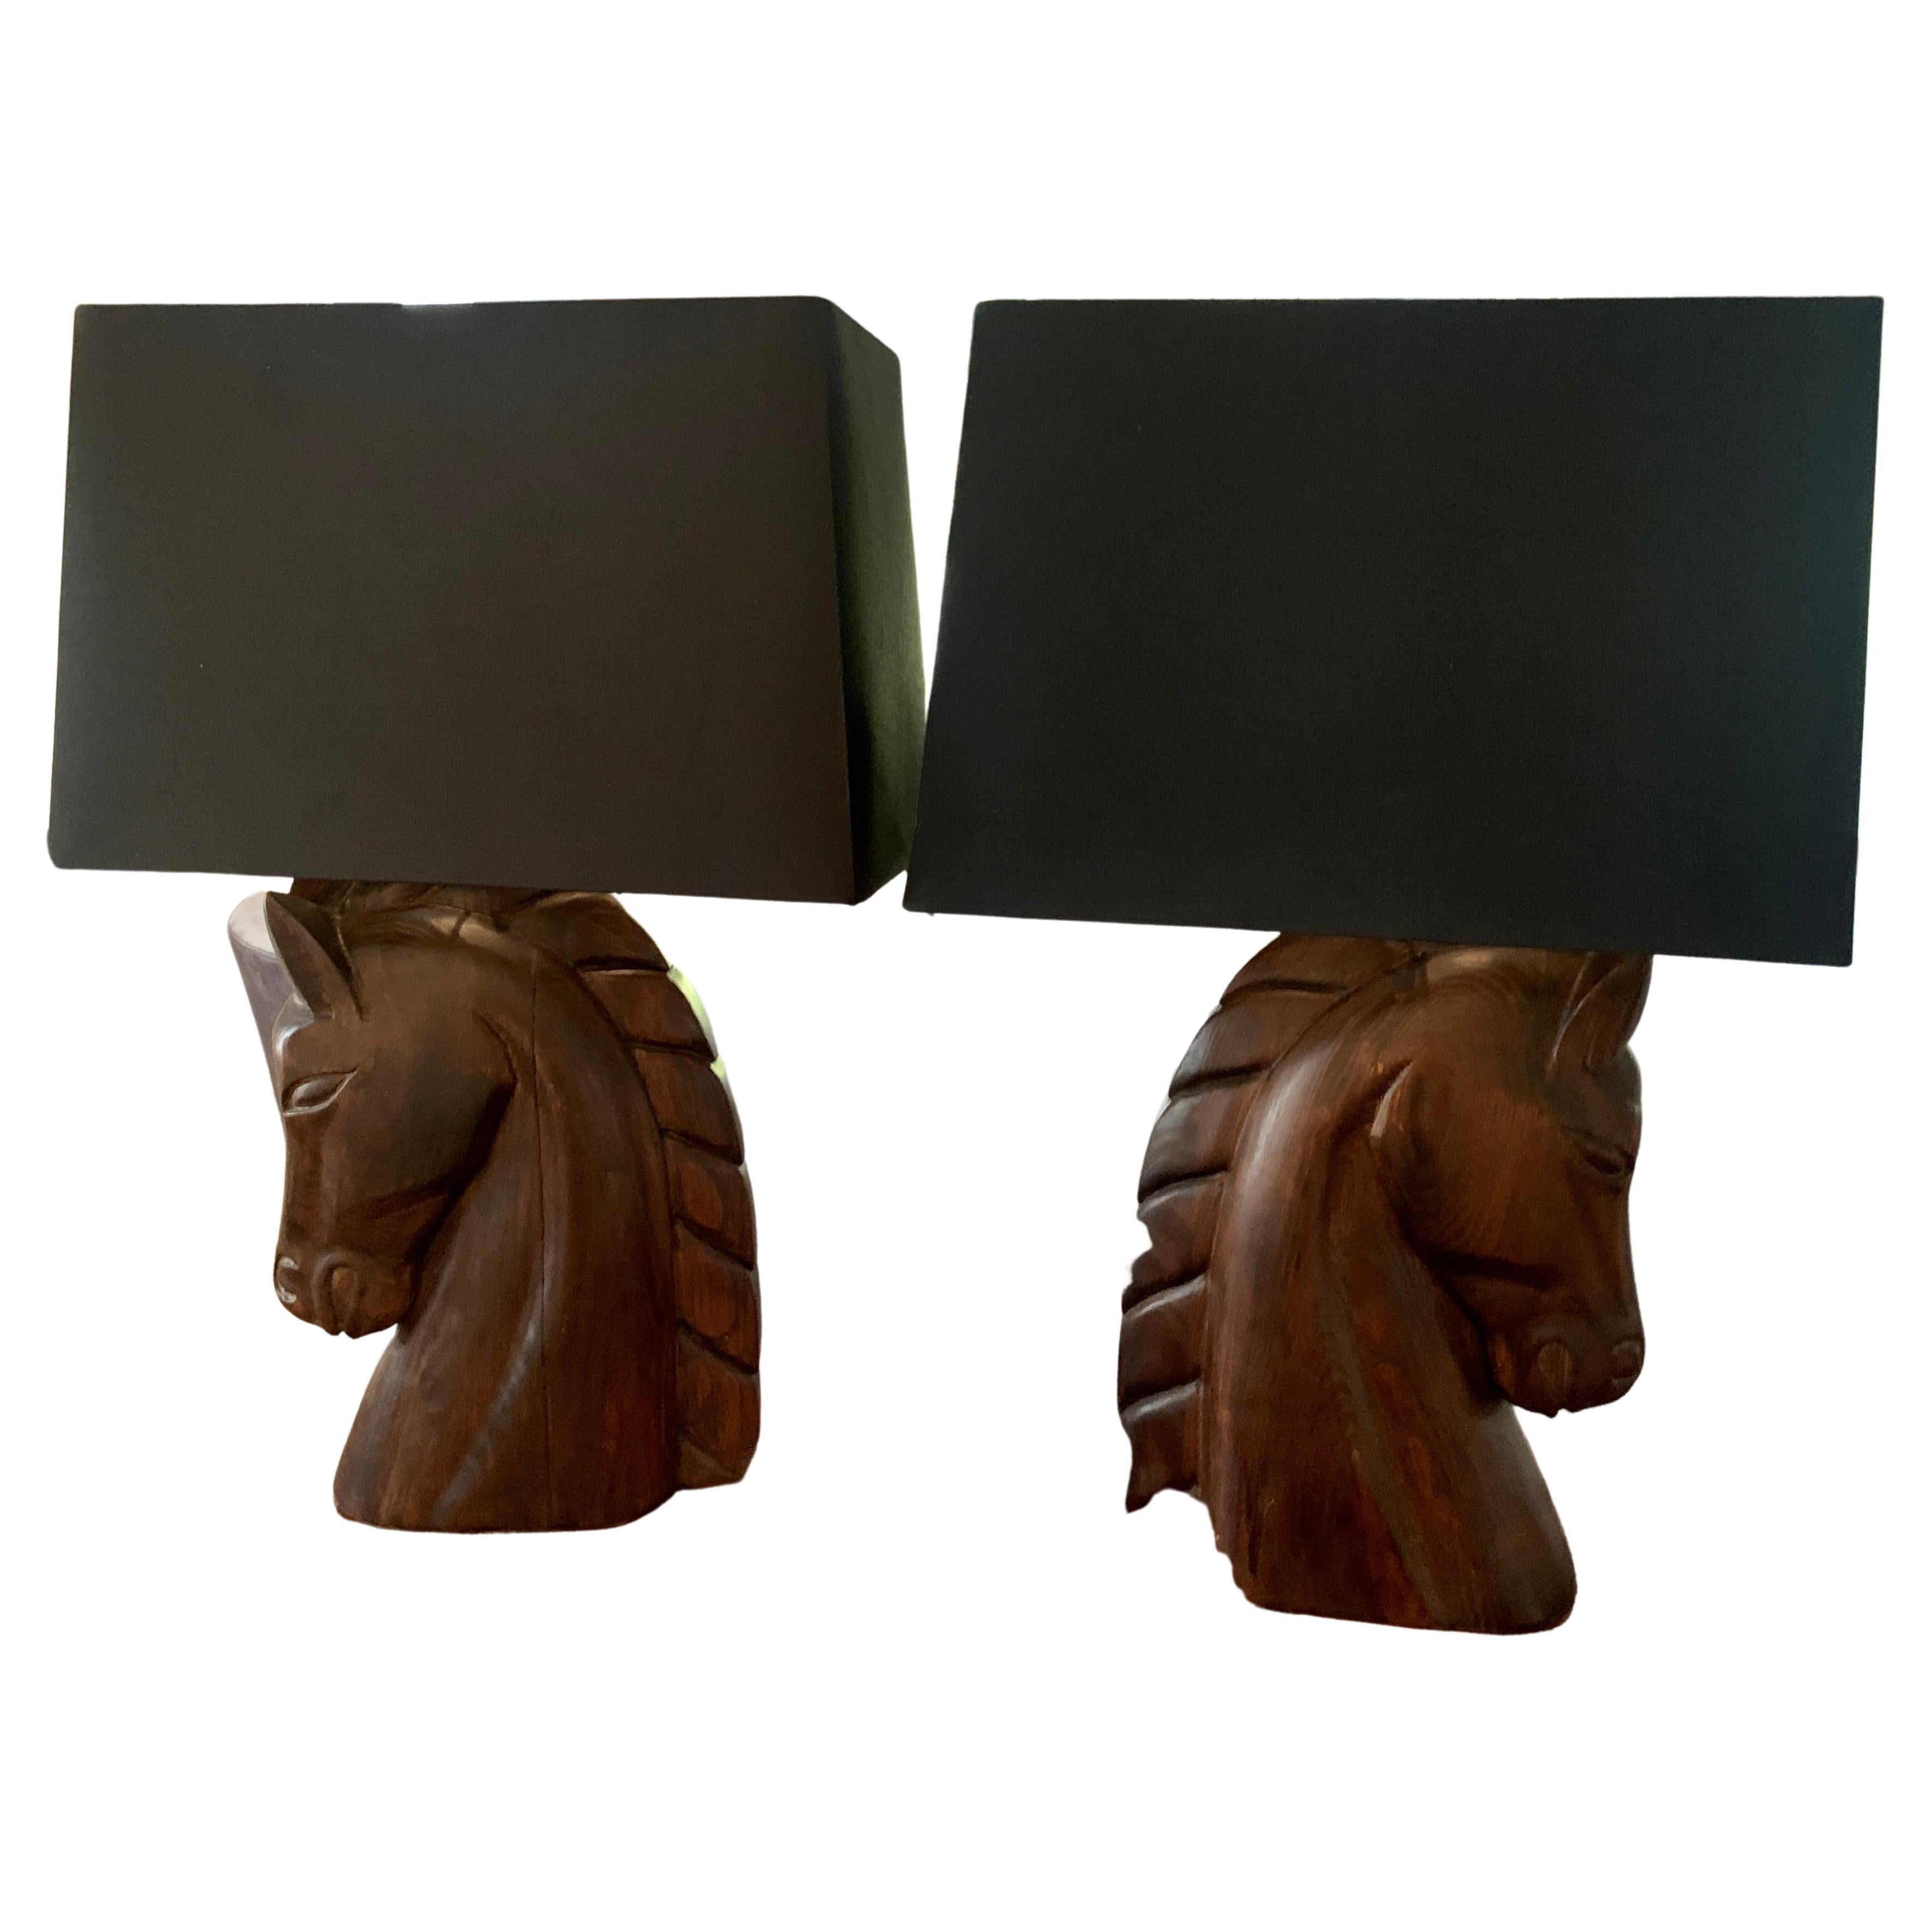 William Haines Carved Horse Lamps with Shades